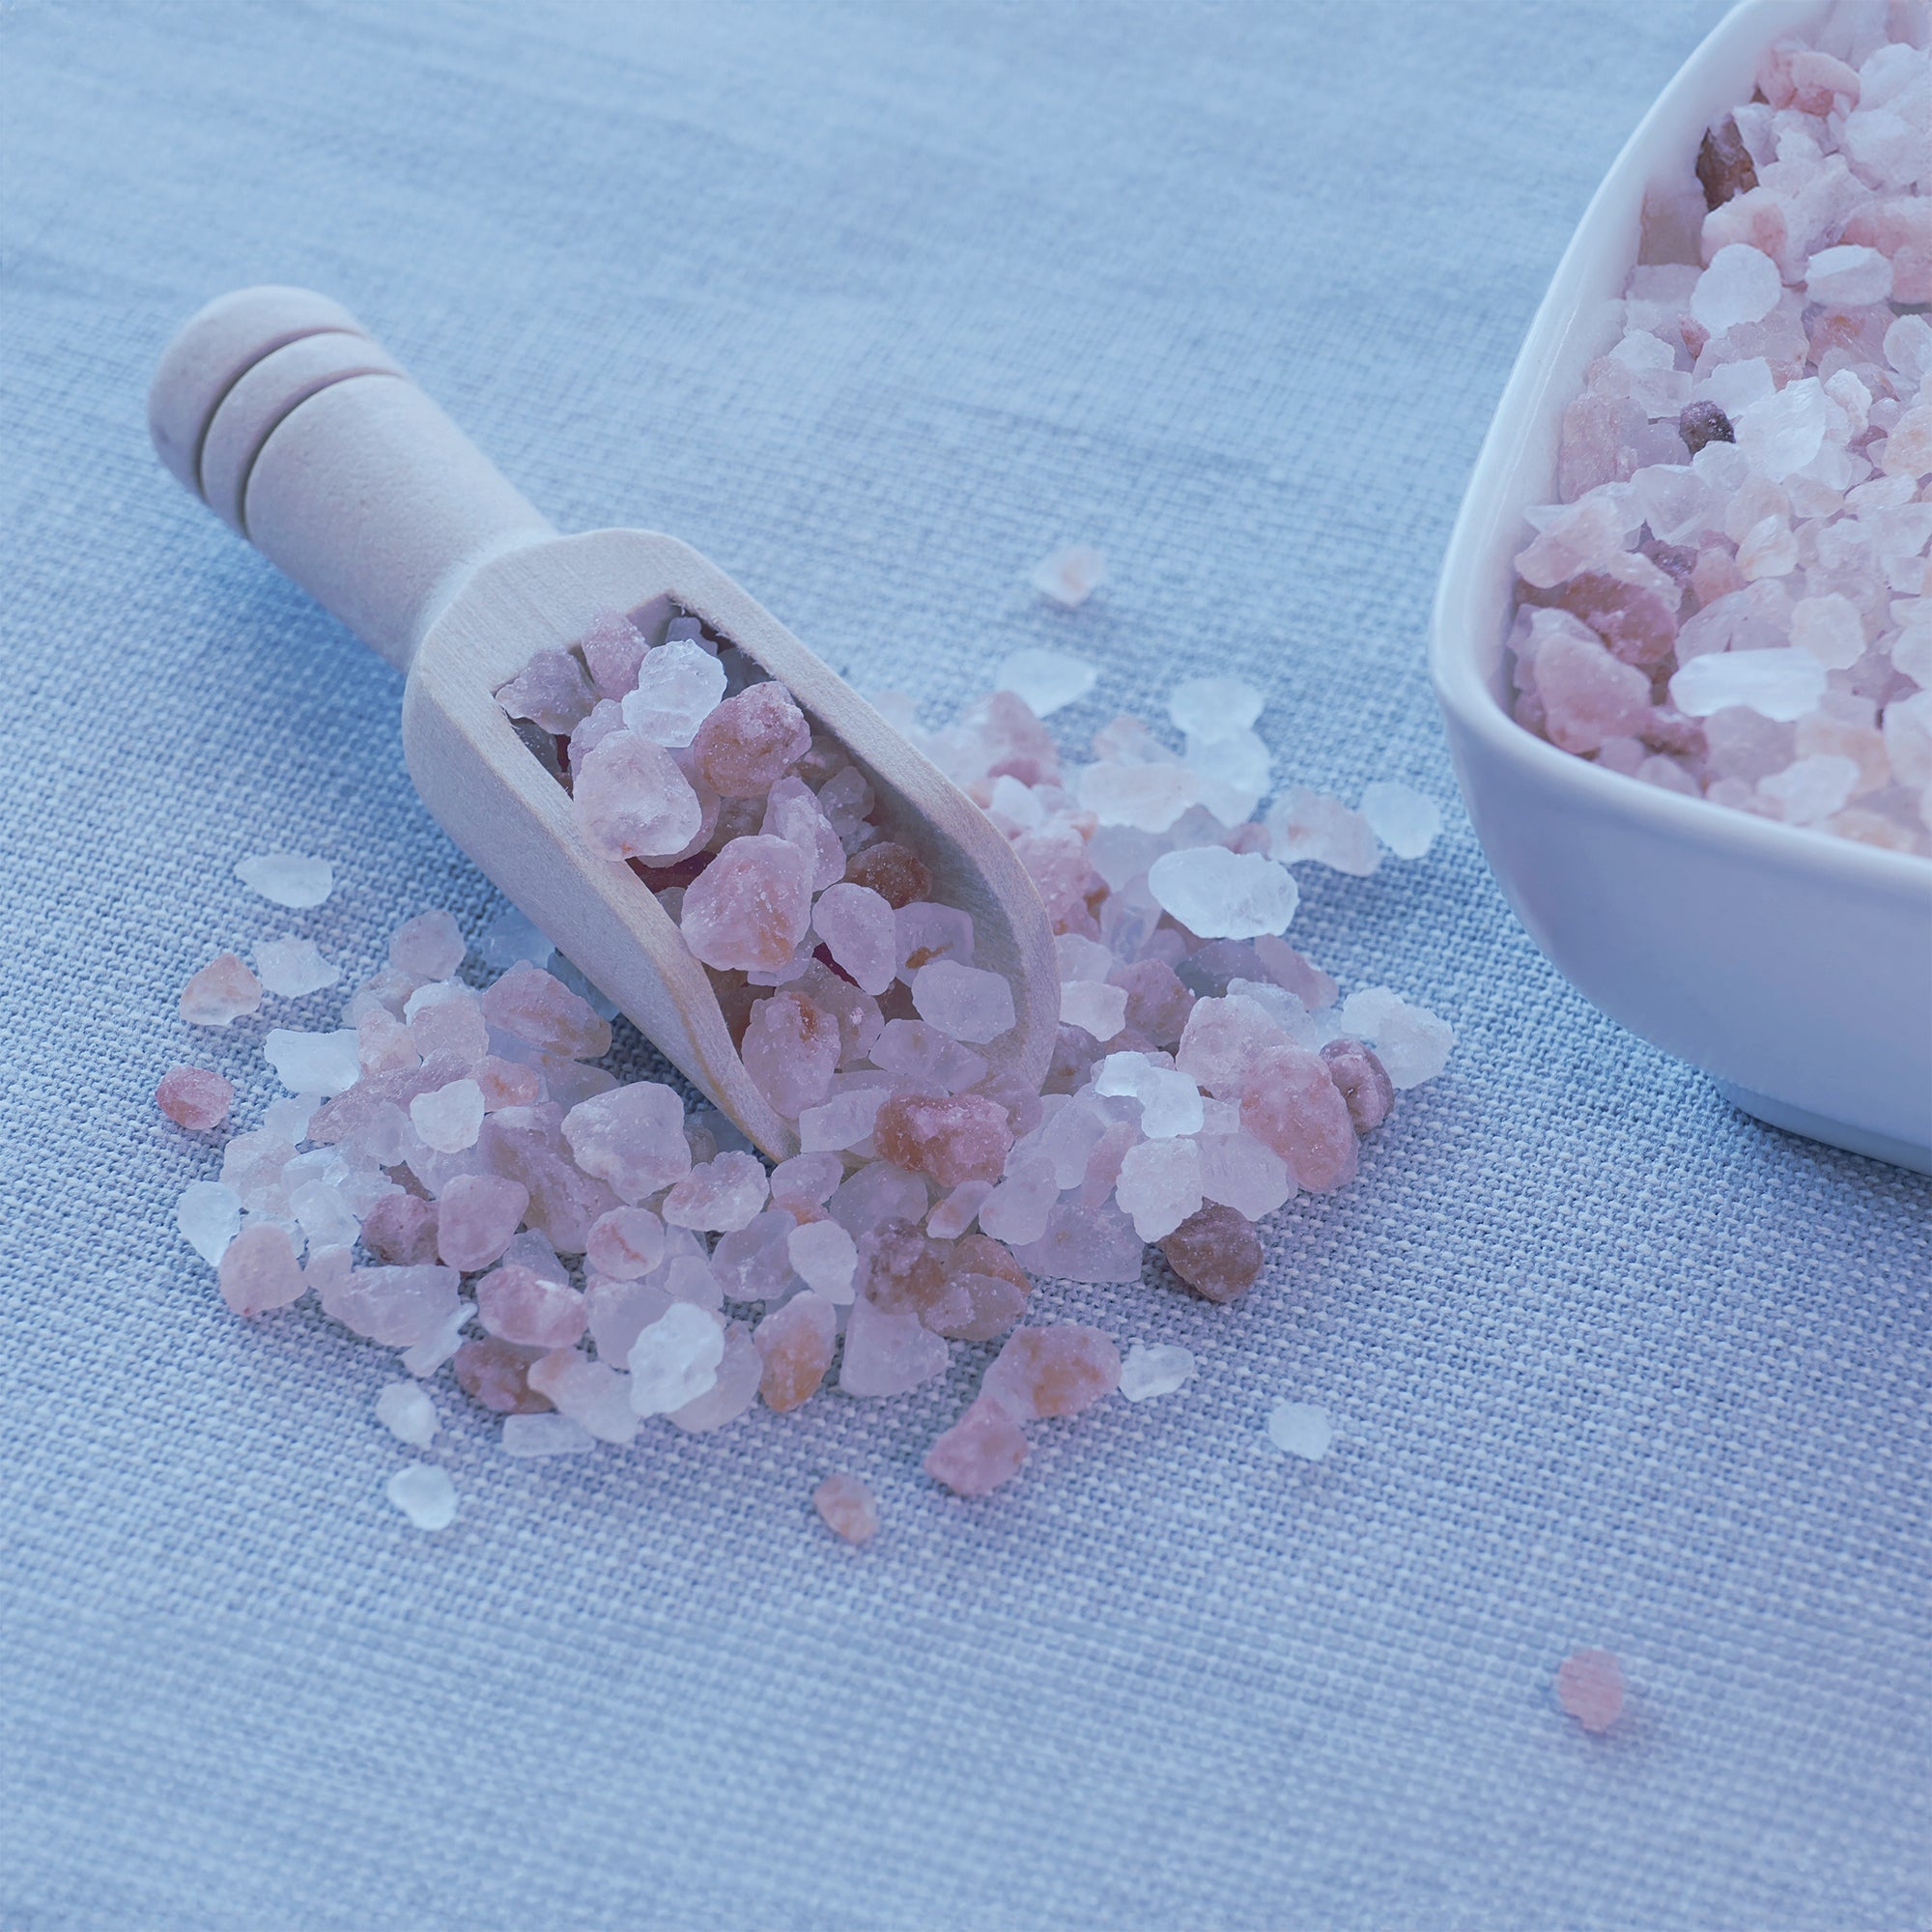 Himalayan Sea Salt Chunks on a linen cloth.  There is a scoop with some of the salt in it and a bowl that has more salt in it as well.